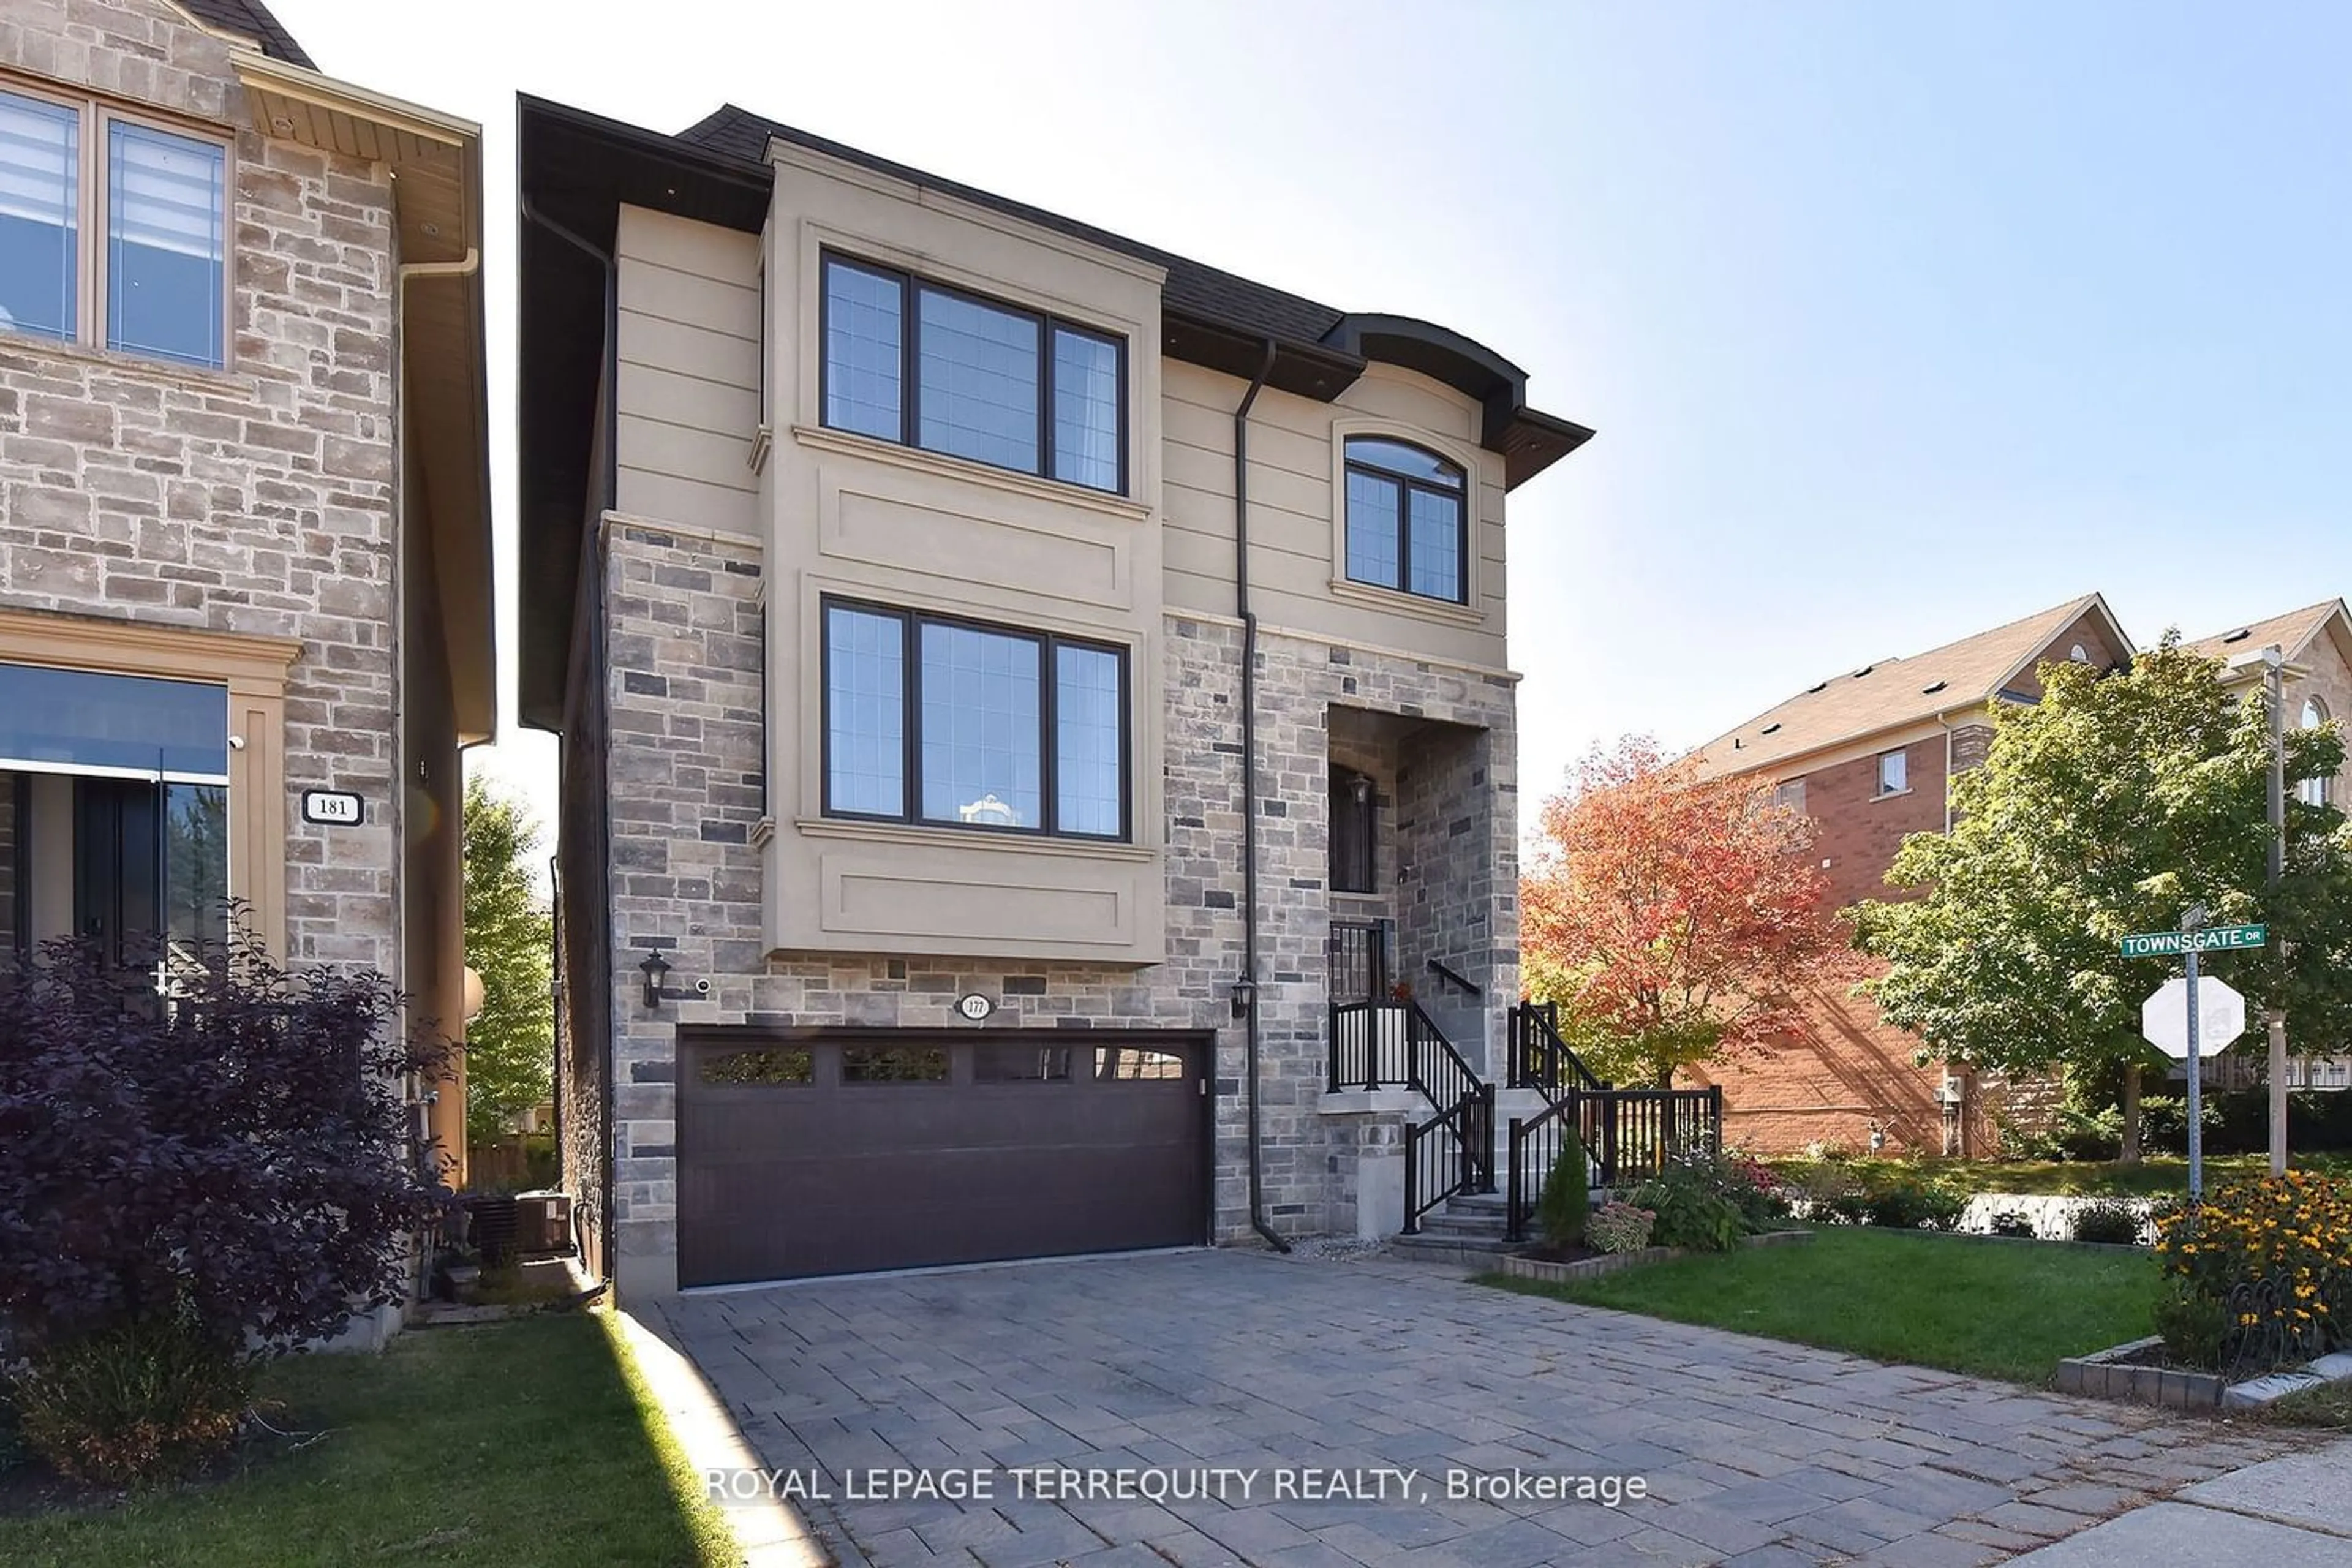 Home with brick exterior material for 177 Townsgate Dr, Vaughan Ontario L4J 8J5